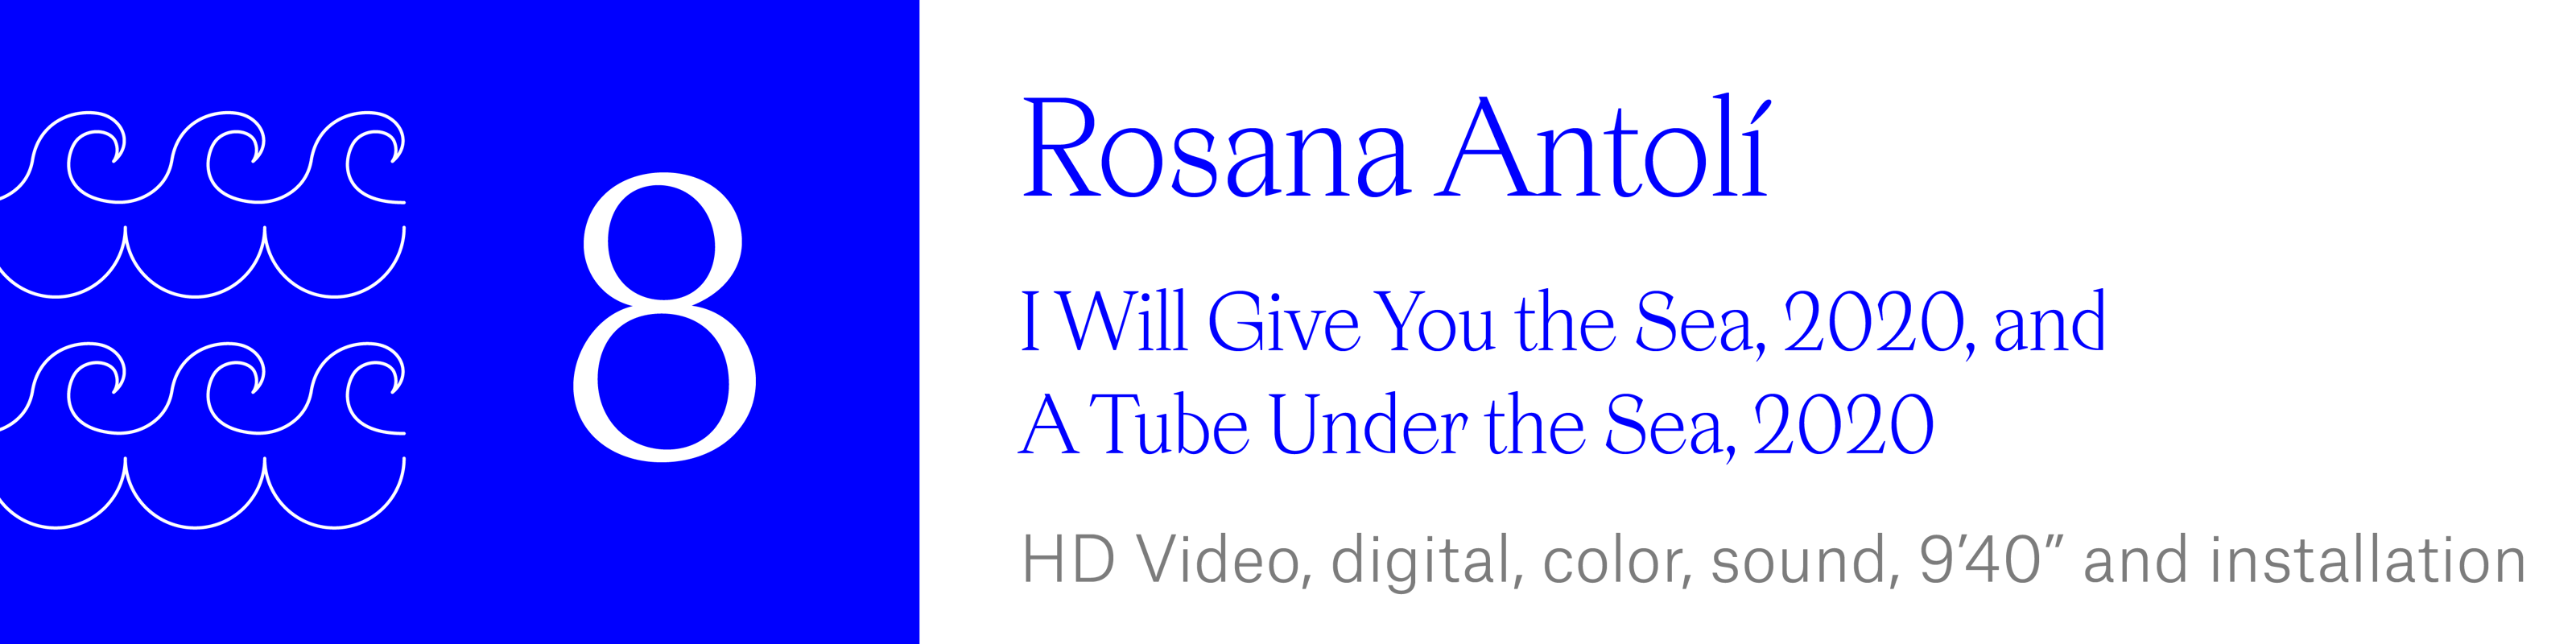 The Wave (8). Rosana Antolí - I Will Give You The Sea, 2020 and A Tube Under The Sea, 2020. HD Video, digital, color, sound, 9 minutes, 40 seconds, and installation.